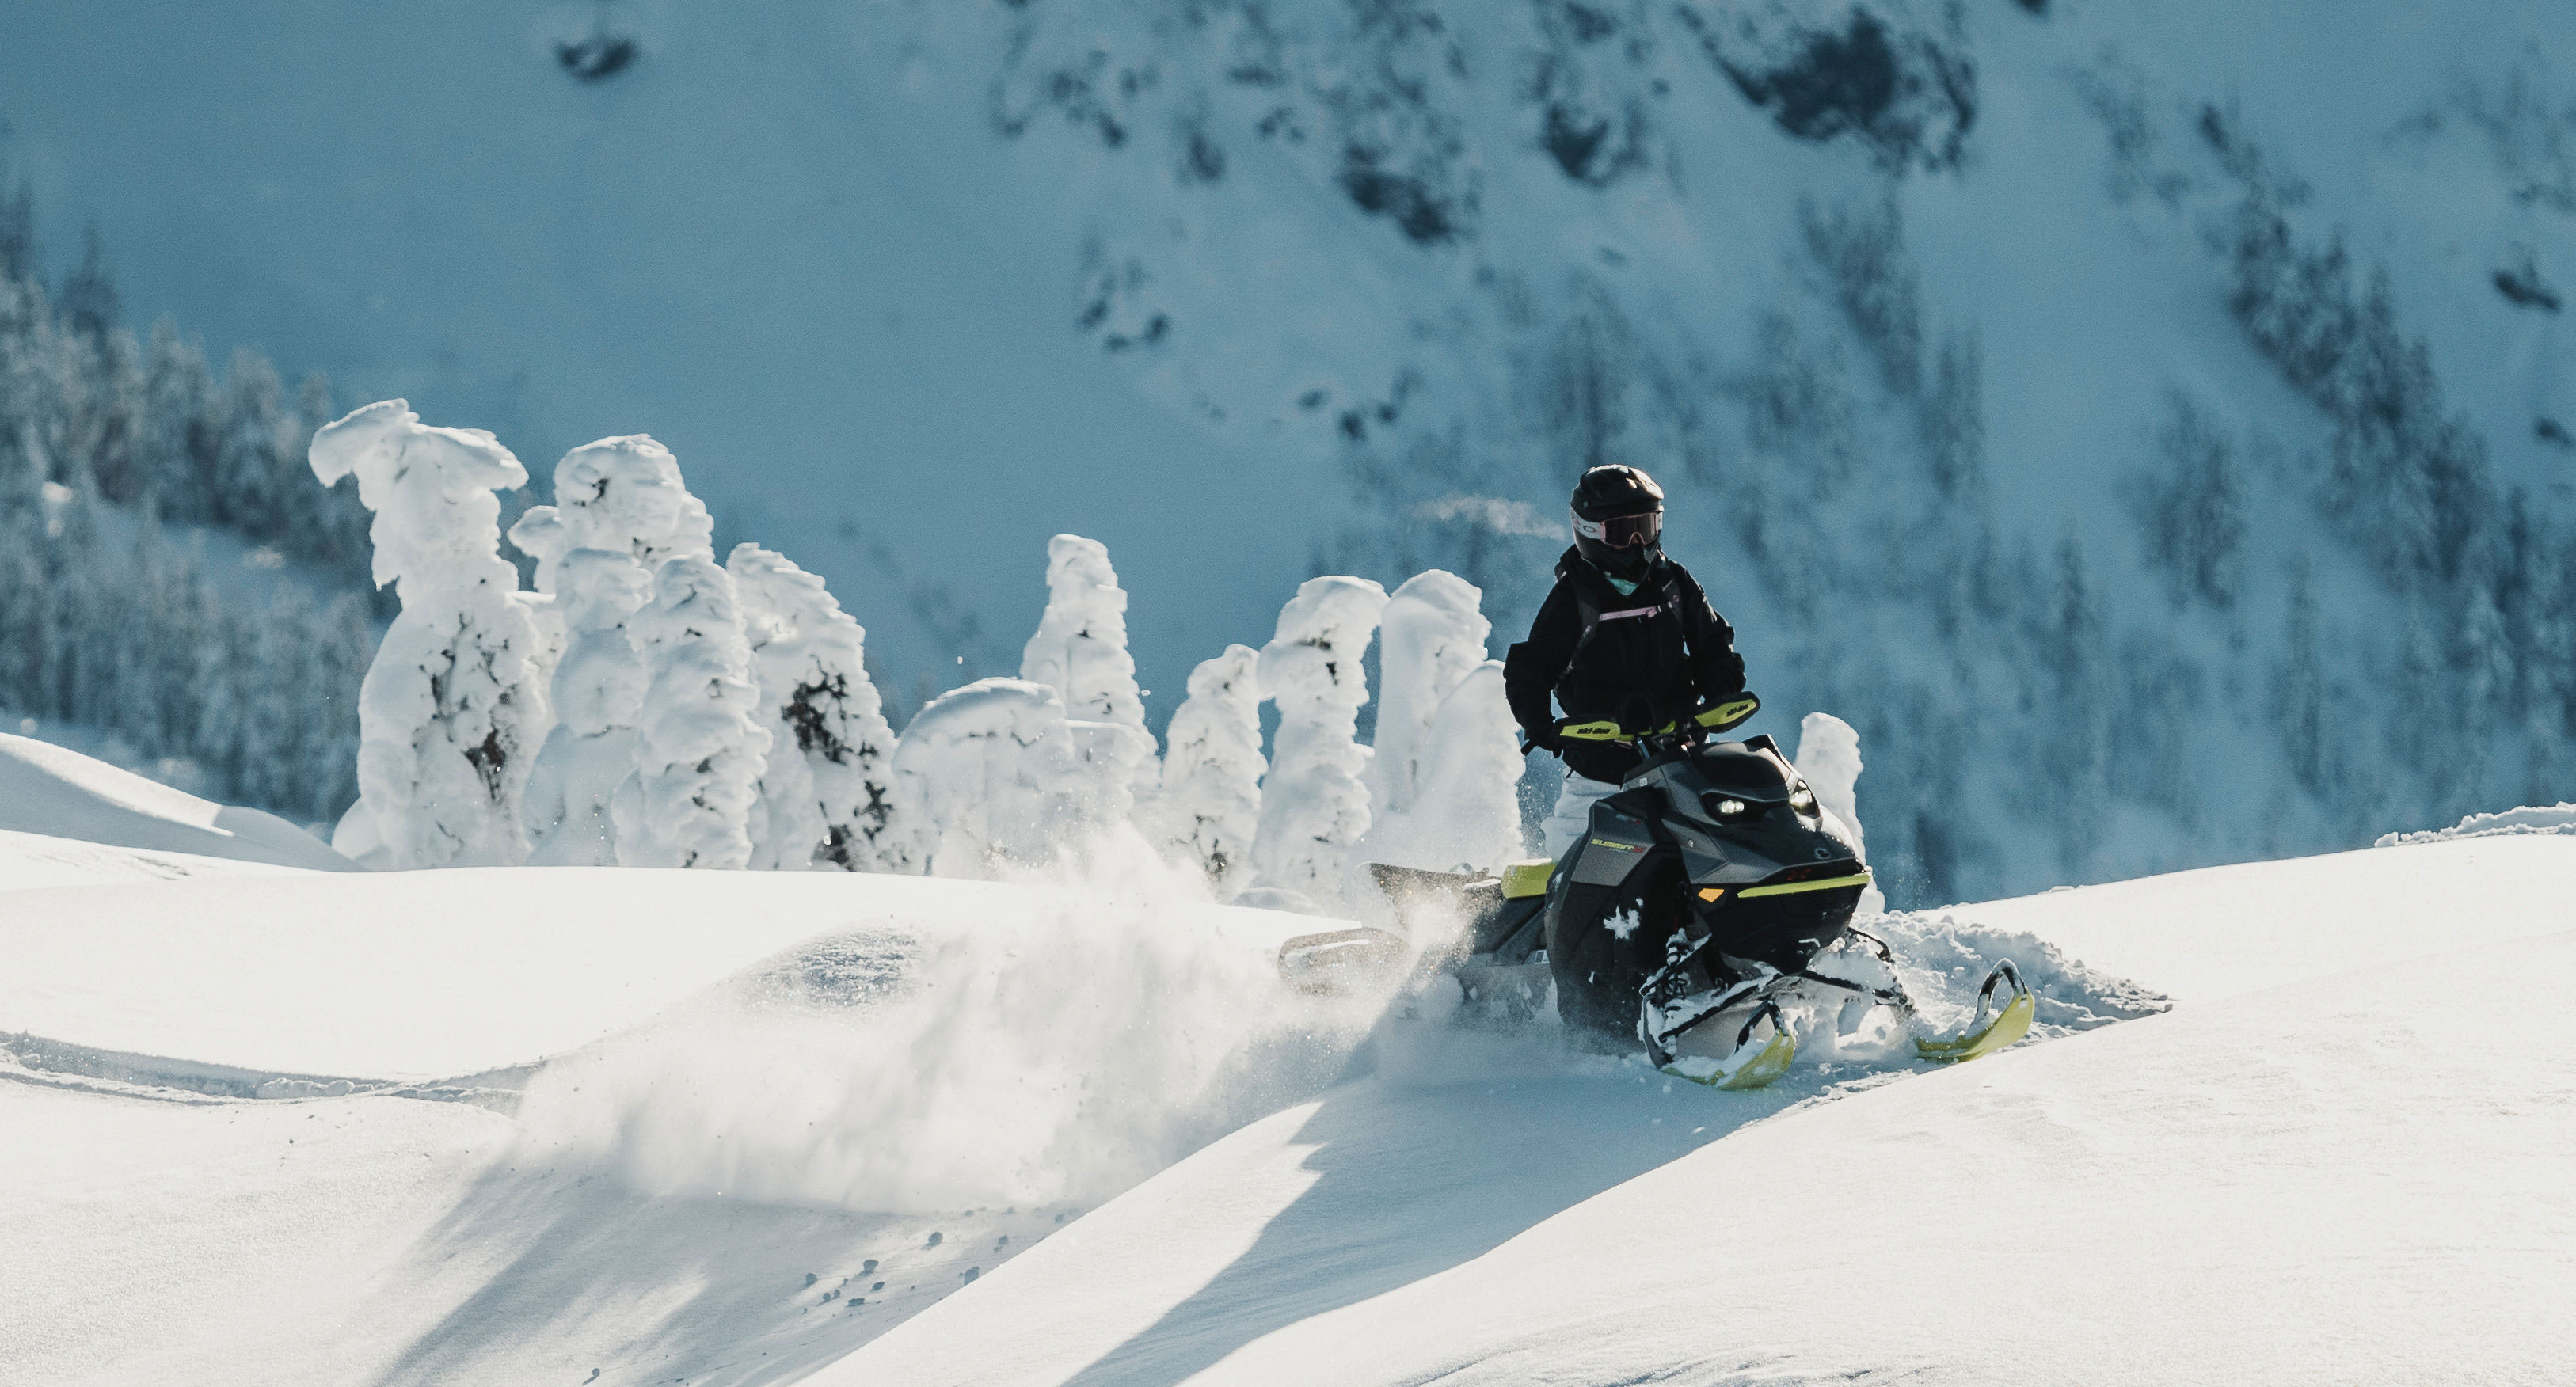 Jamie Anderson riding a Ski-Doo snowmobile on top of a mountain